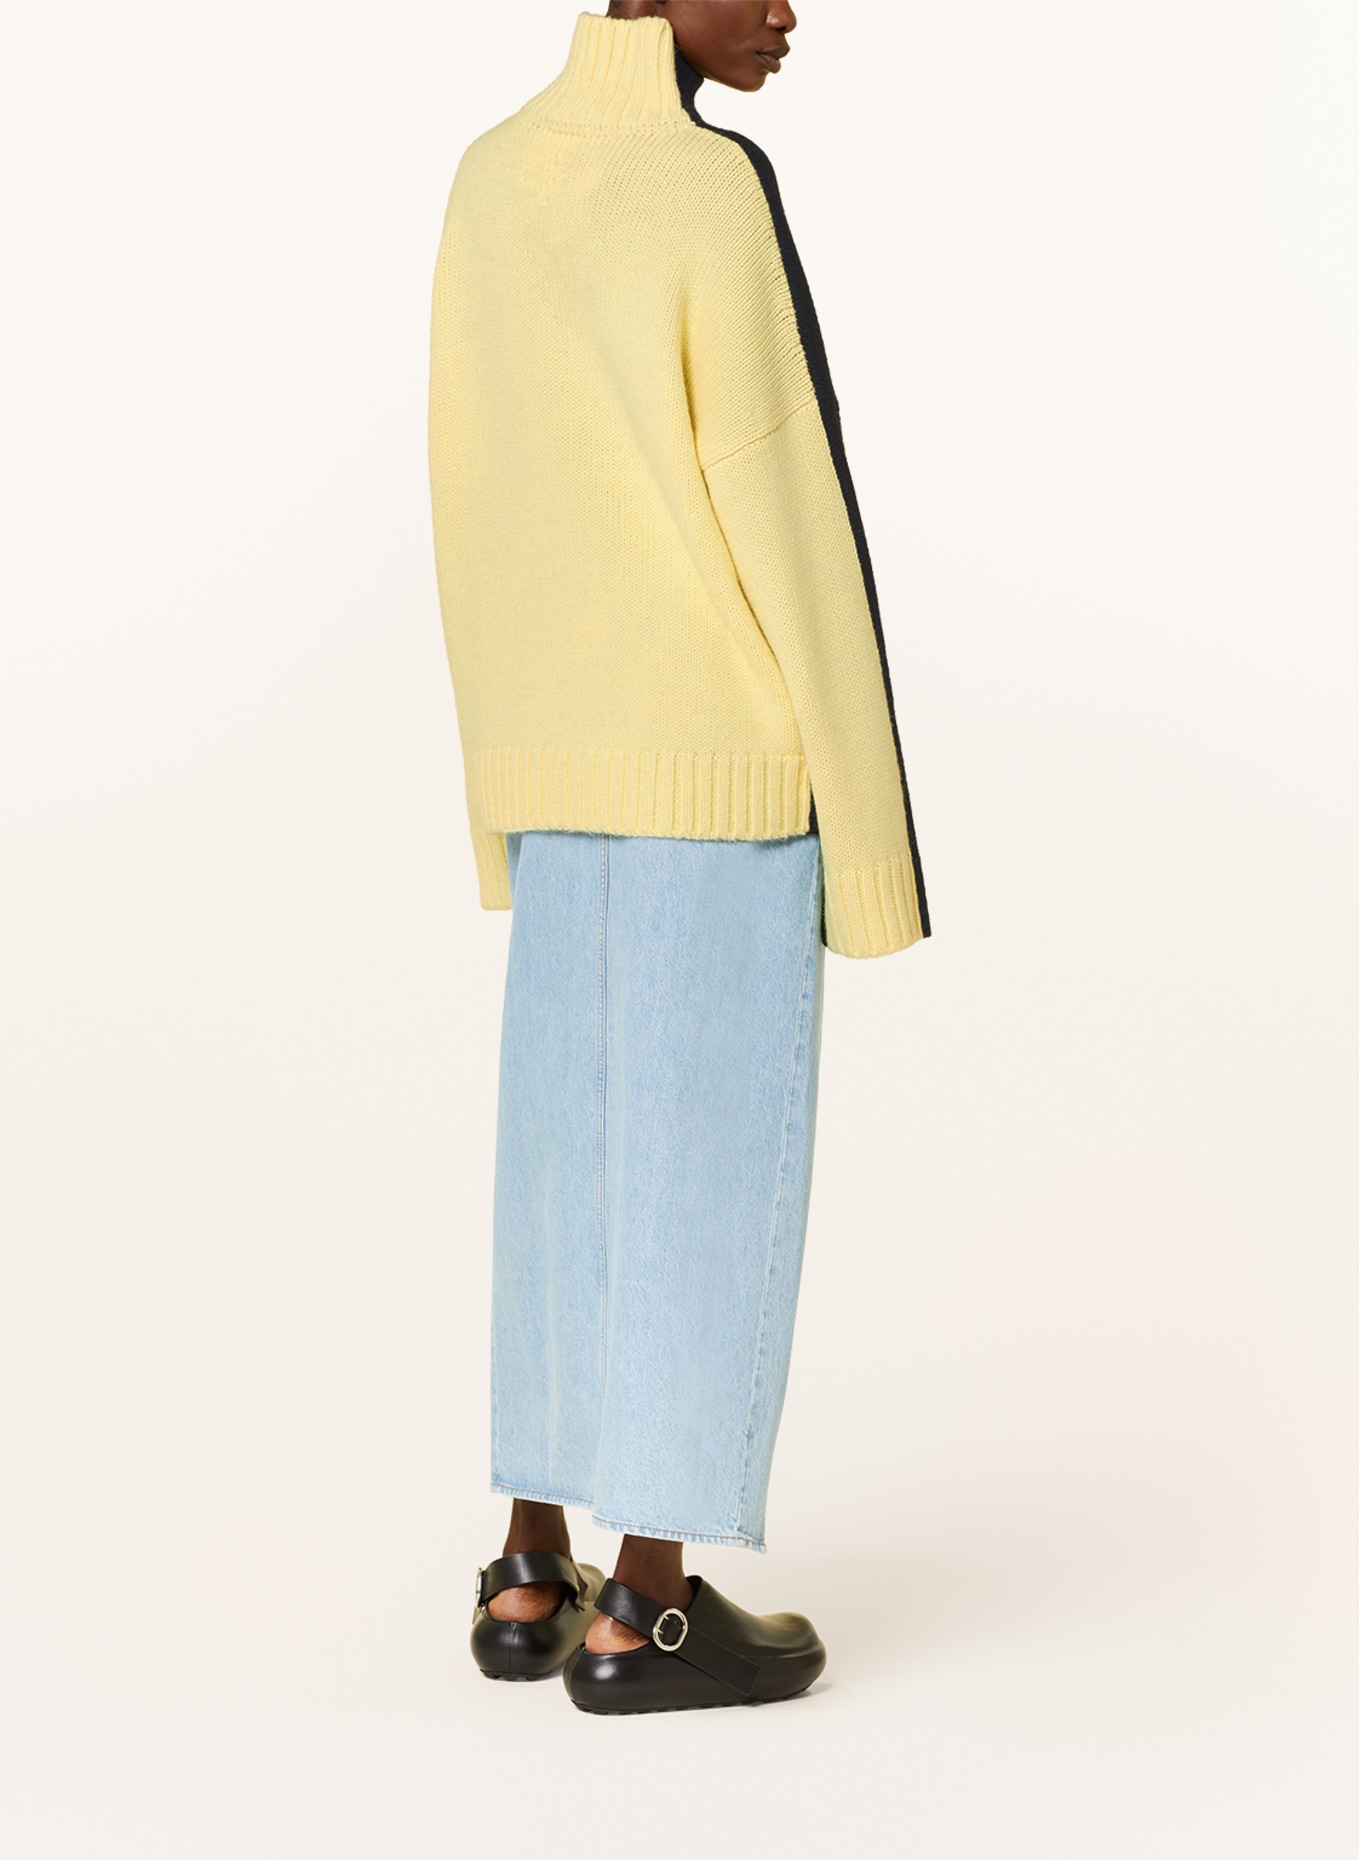 JW ANDERSON Sweater with alpaca, Color: BLACK/ YELLOW (Image 3)